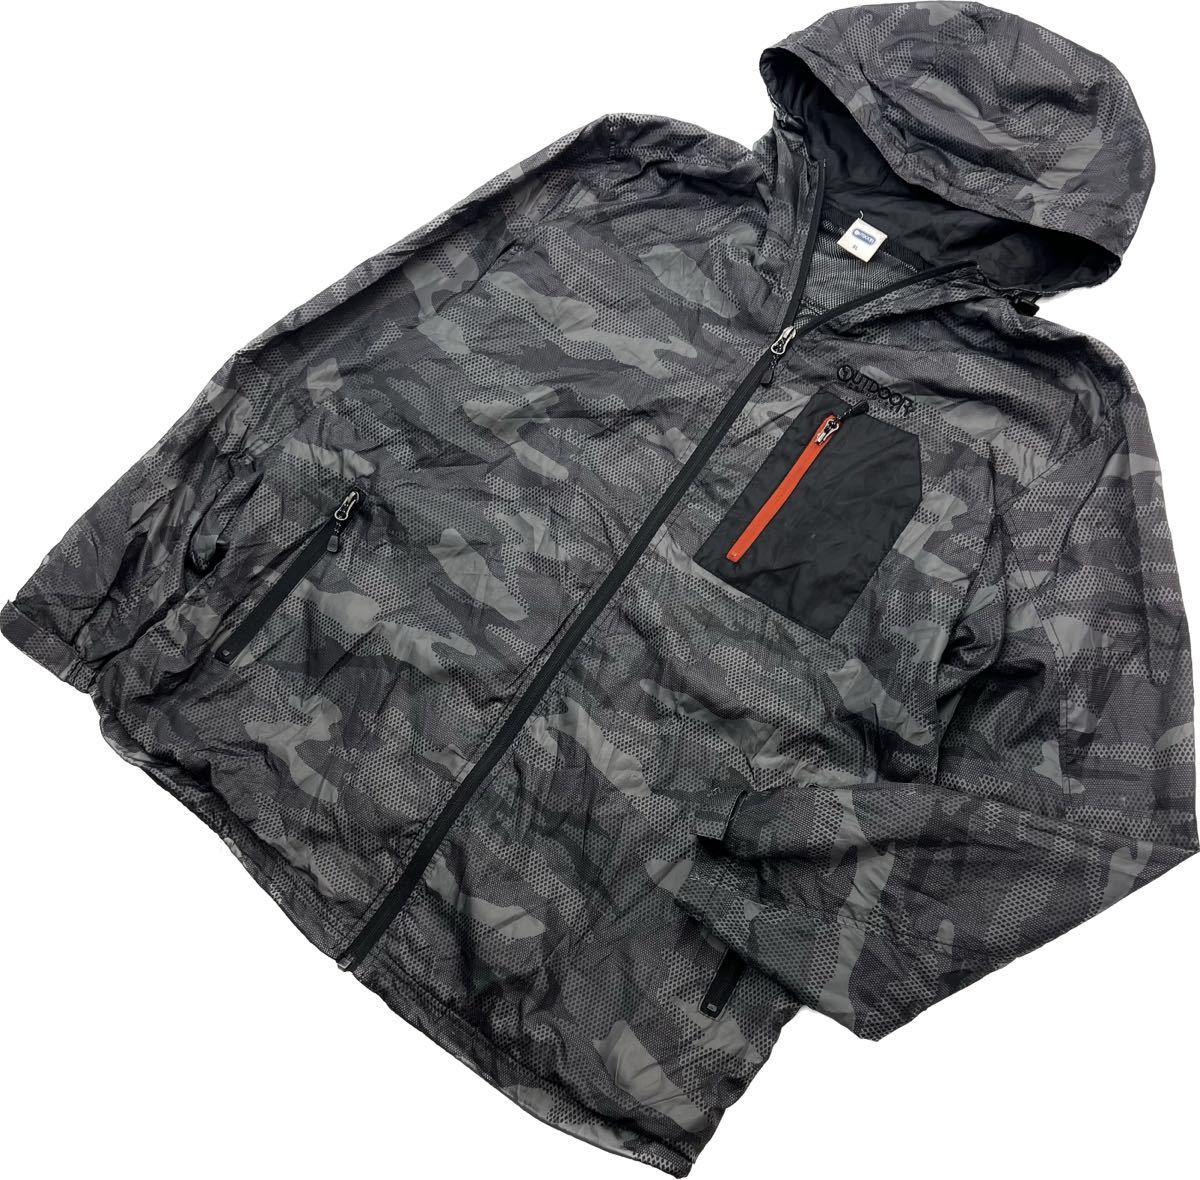 OUTDOOR PRODUCTS * 5L large size * camouflage nylon jacket reverse side mesh mountain climbing motion camp popular Outdoor Products #AL233